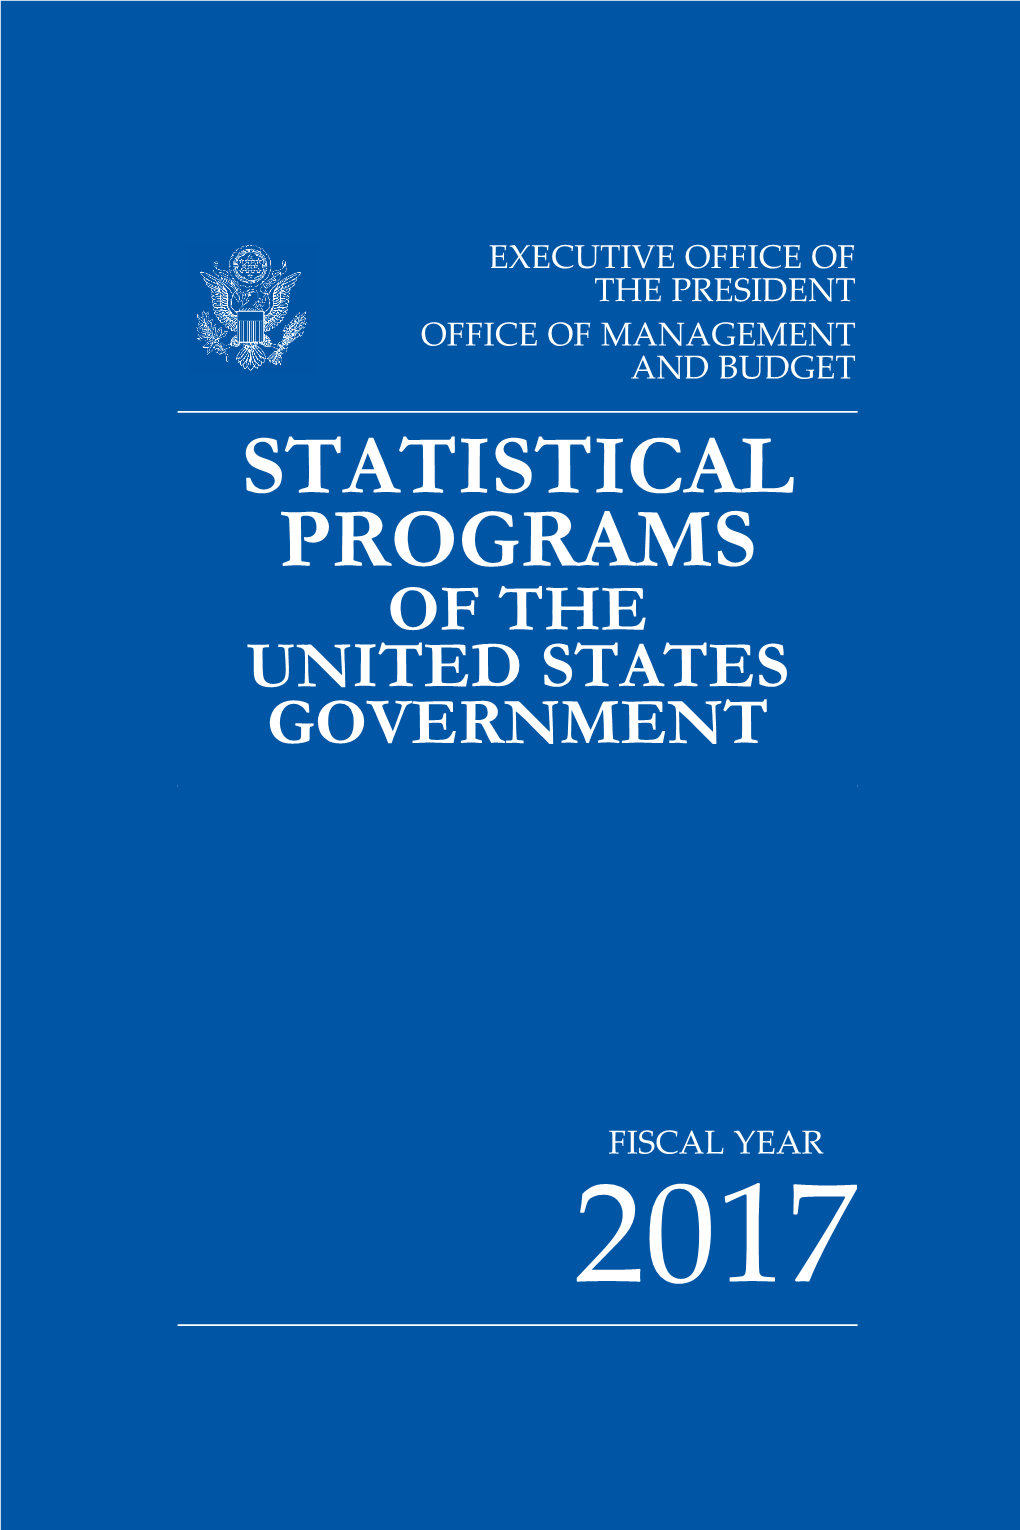 Statistical Programs of the United States Government, Fiscal Year 2017